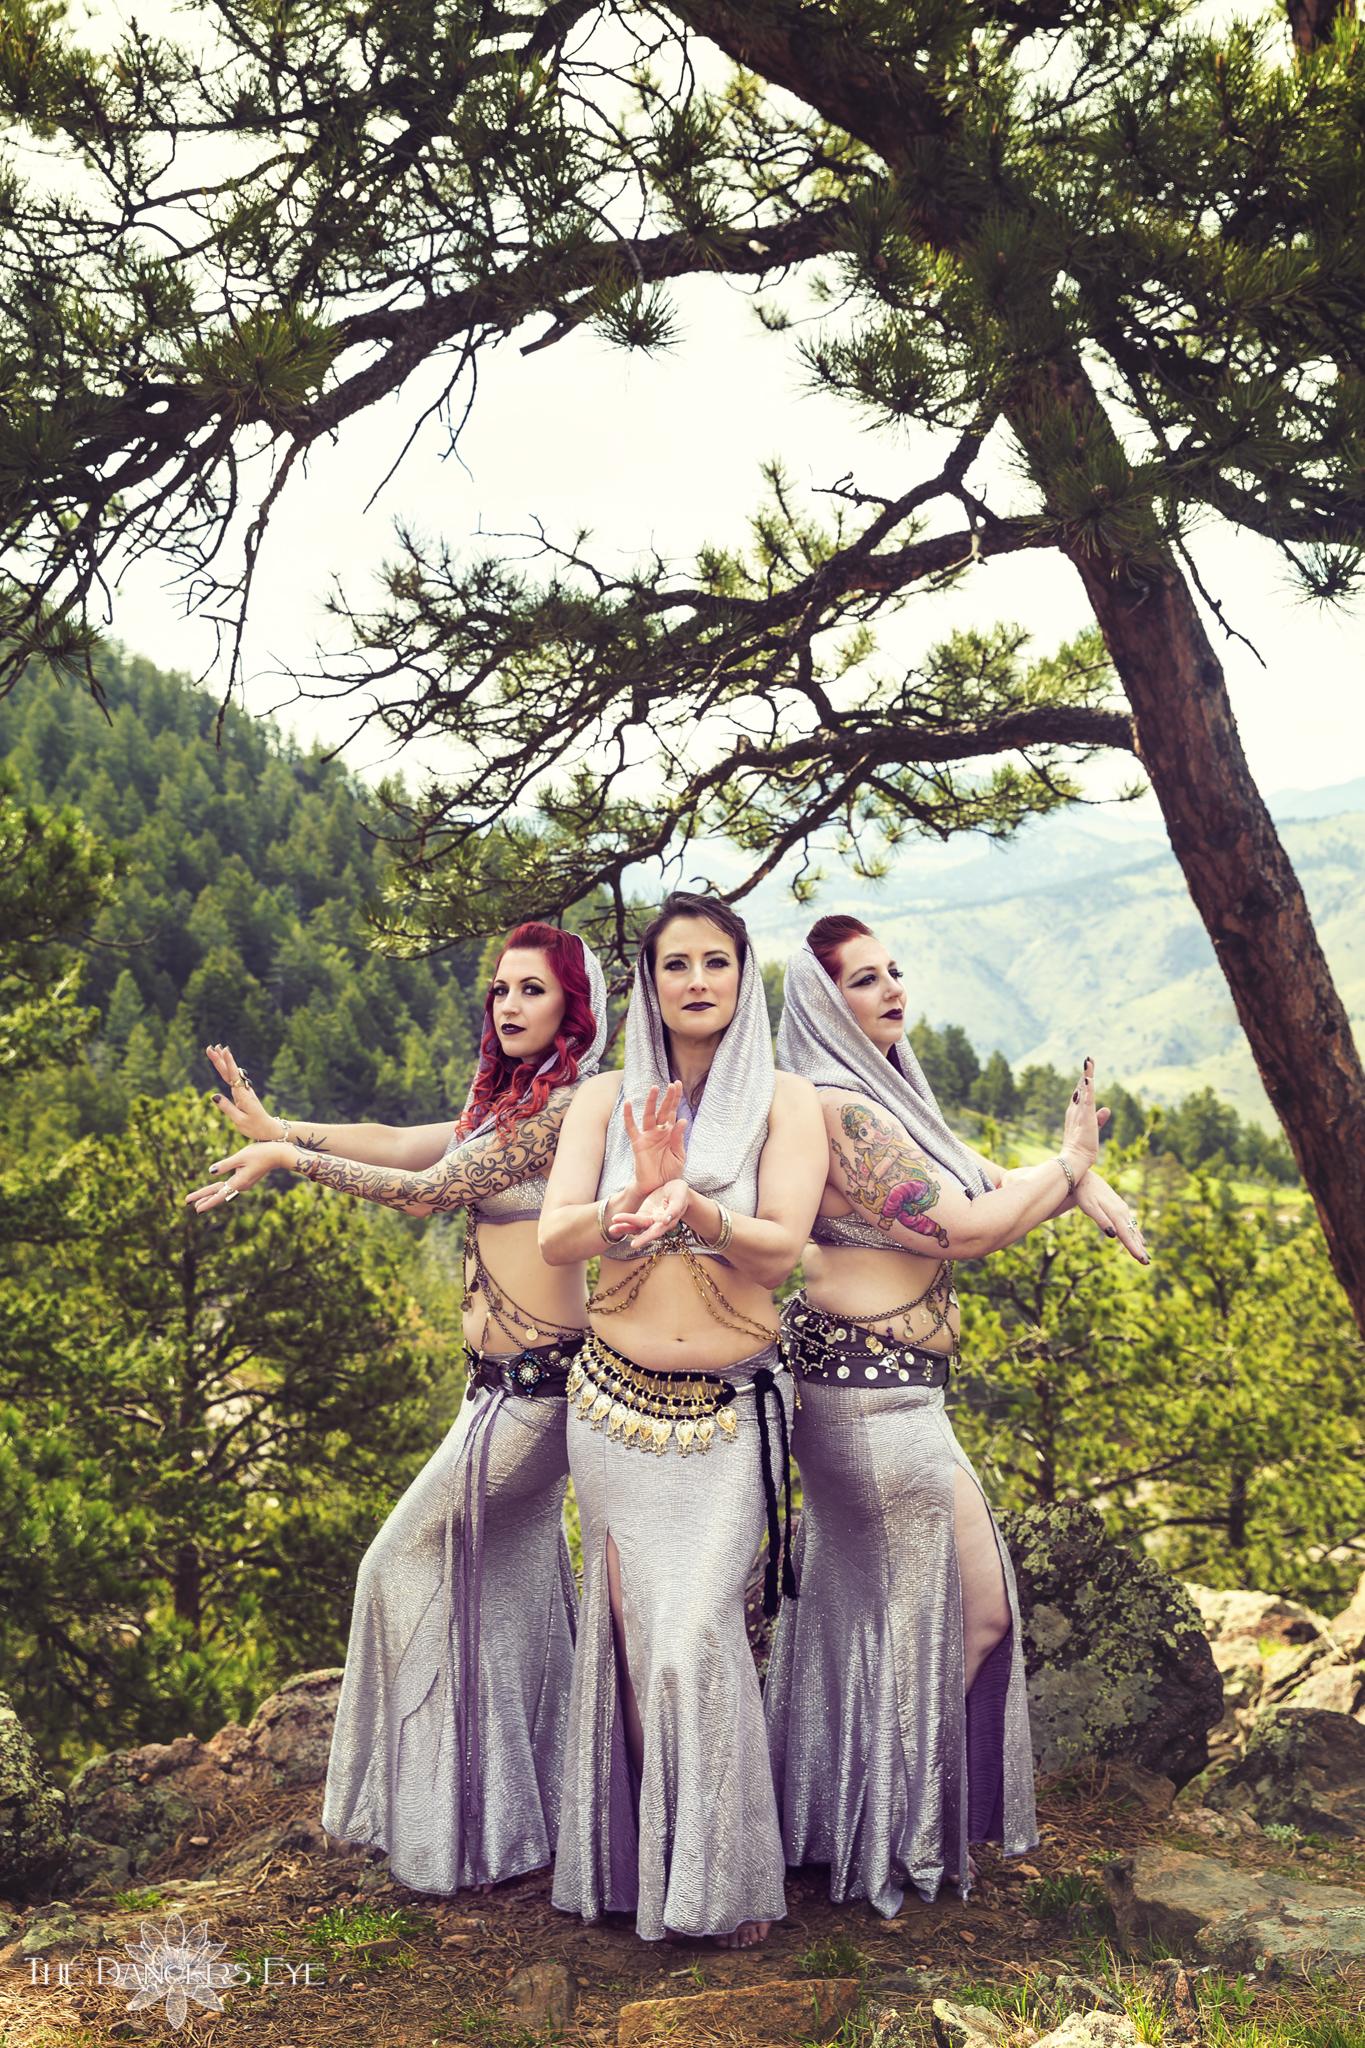 January/February Fundamentals of Tribal Improv Belly Dance 8 week session 